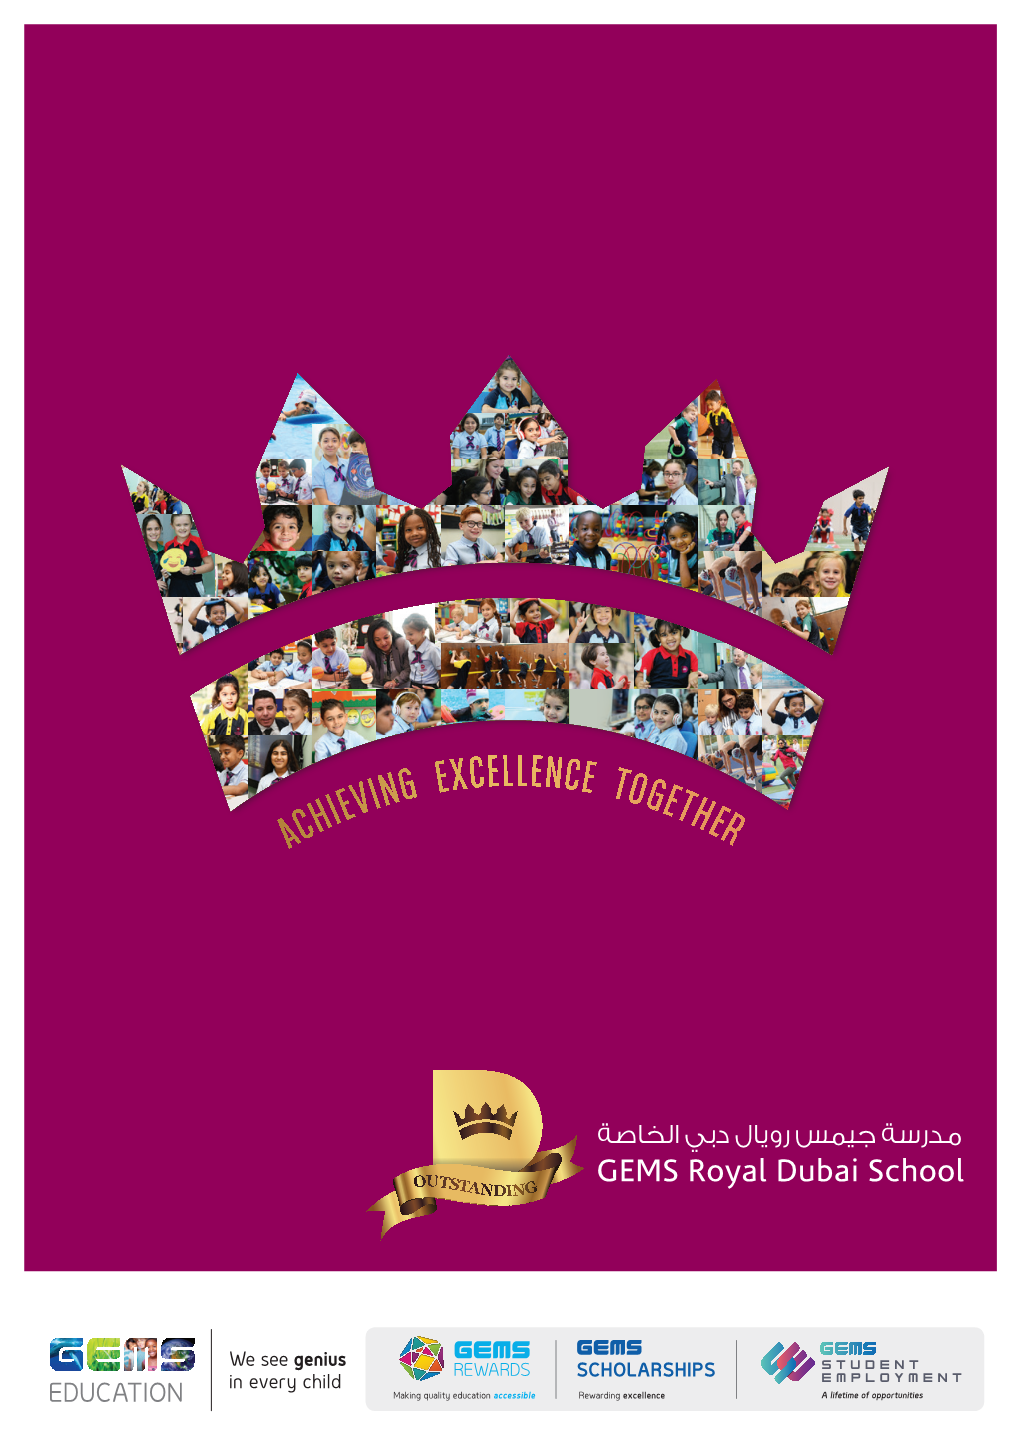 We See Genius in Every Child Making Quality Education Accessible Rewarding Excellence the GEMS DIFFERENCE